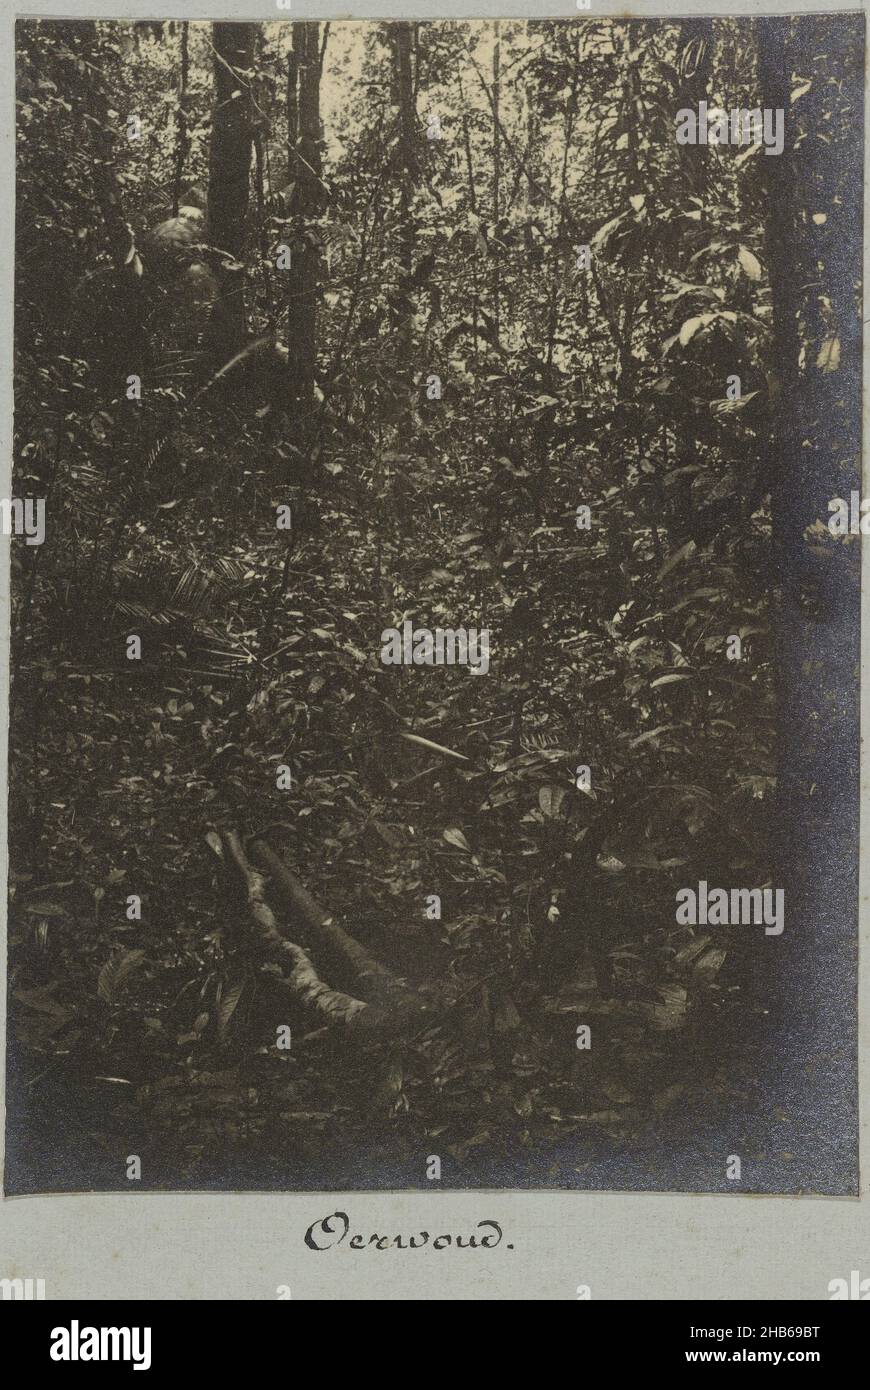 Jungle (title on object), View into the jungle. Part of the photo album Souvenir de Voyage (part 1), about the life of the Doijer family in and around the plantation Ma Retraite in Suriname in the years 1906-1913., Hendrik Doijer (attributed to), Suriname, 1906 - 1913, photographic support, gelatin silver print, height 112 mm × width 81 mm Stock Photo